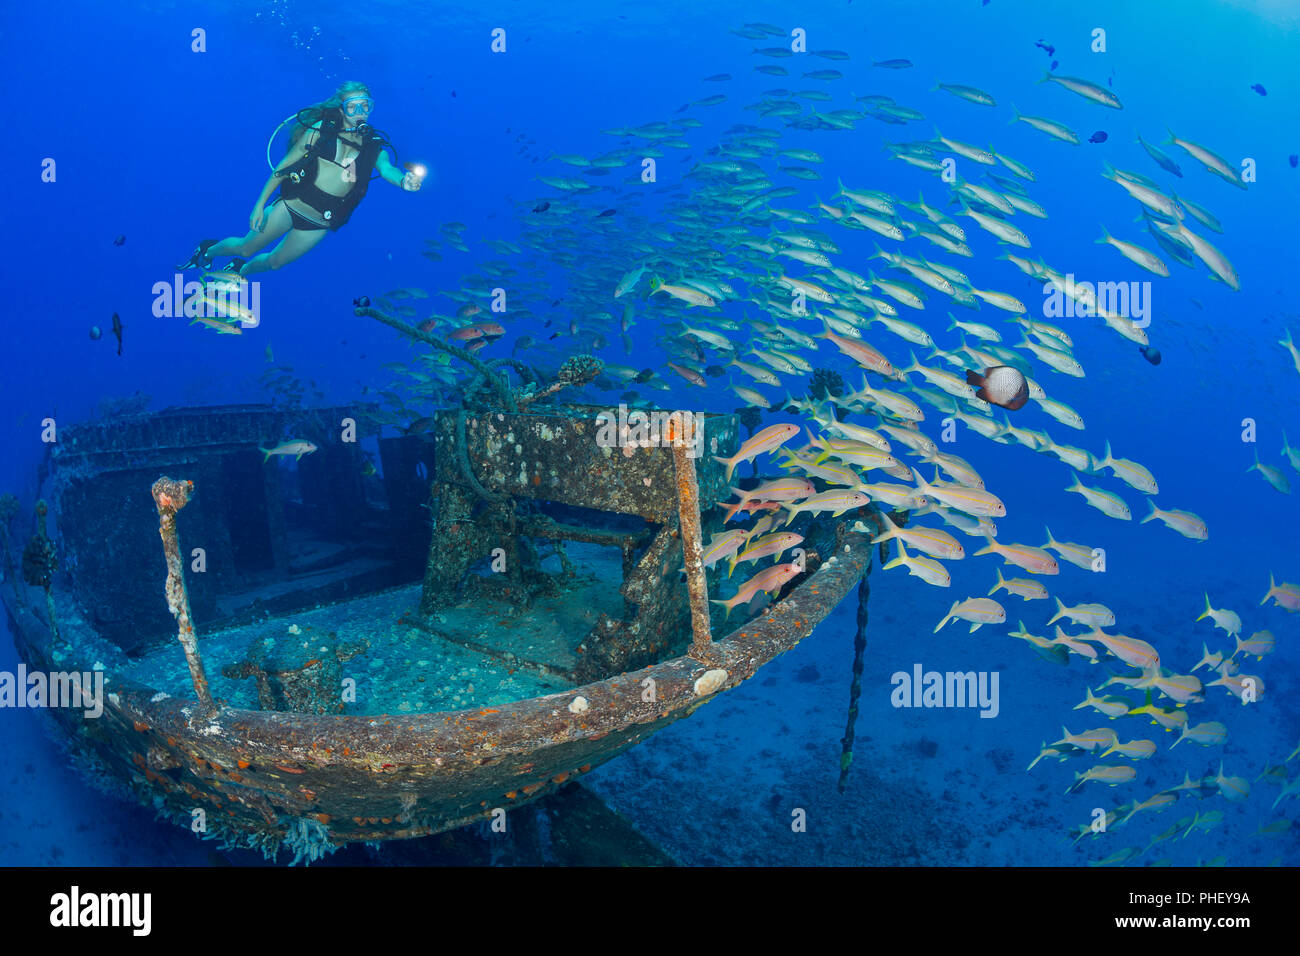 A diver (MR) and schooling yellowfin goatfish on The Carthaginian, a Lahaina landmark, sunk as an artifical reef off Lahaina, Maui, Hawaii in December Stock Photo